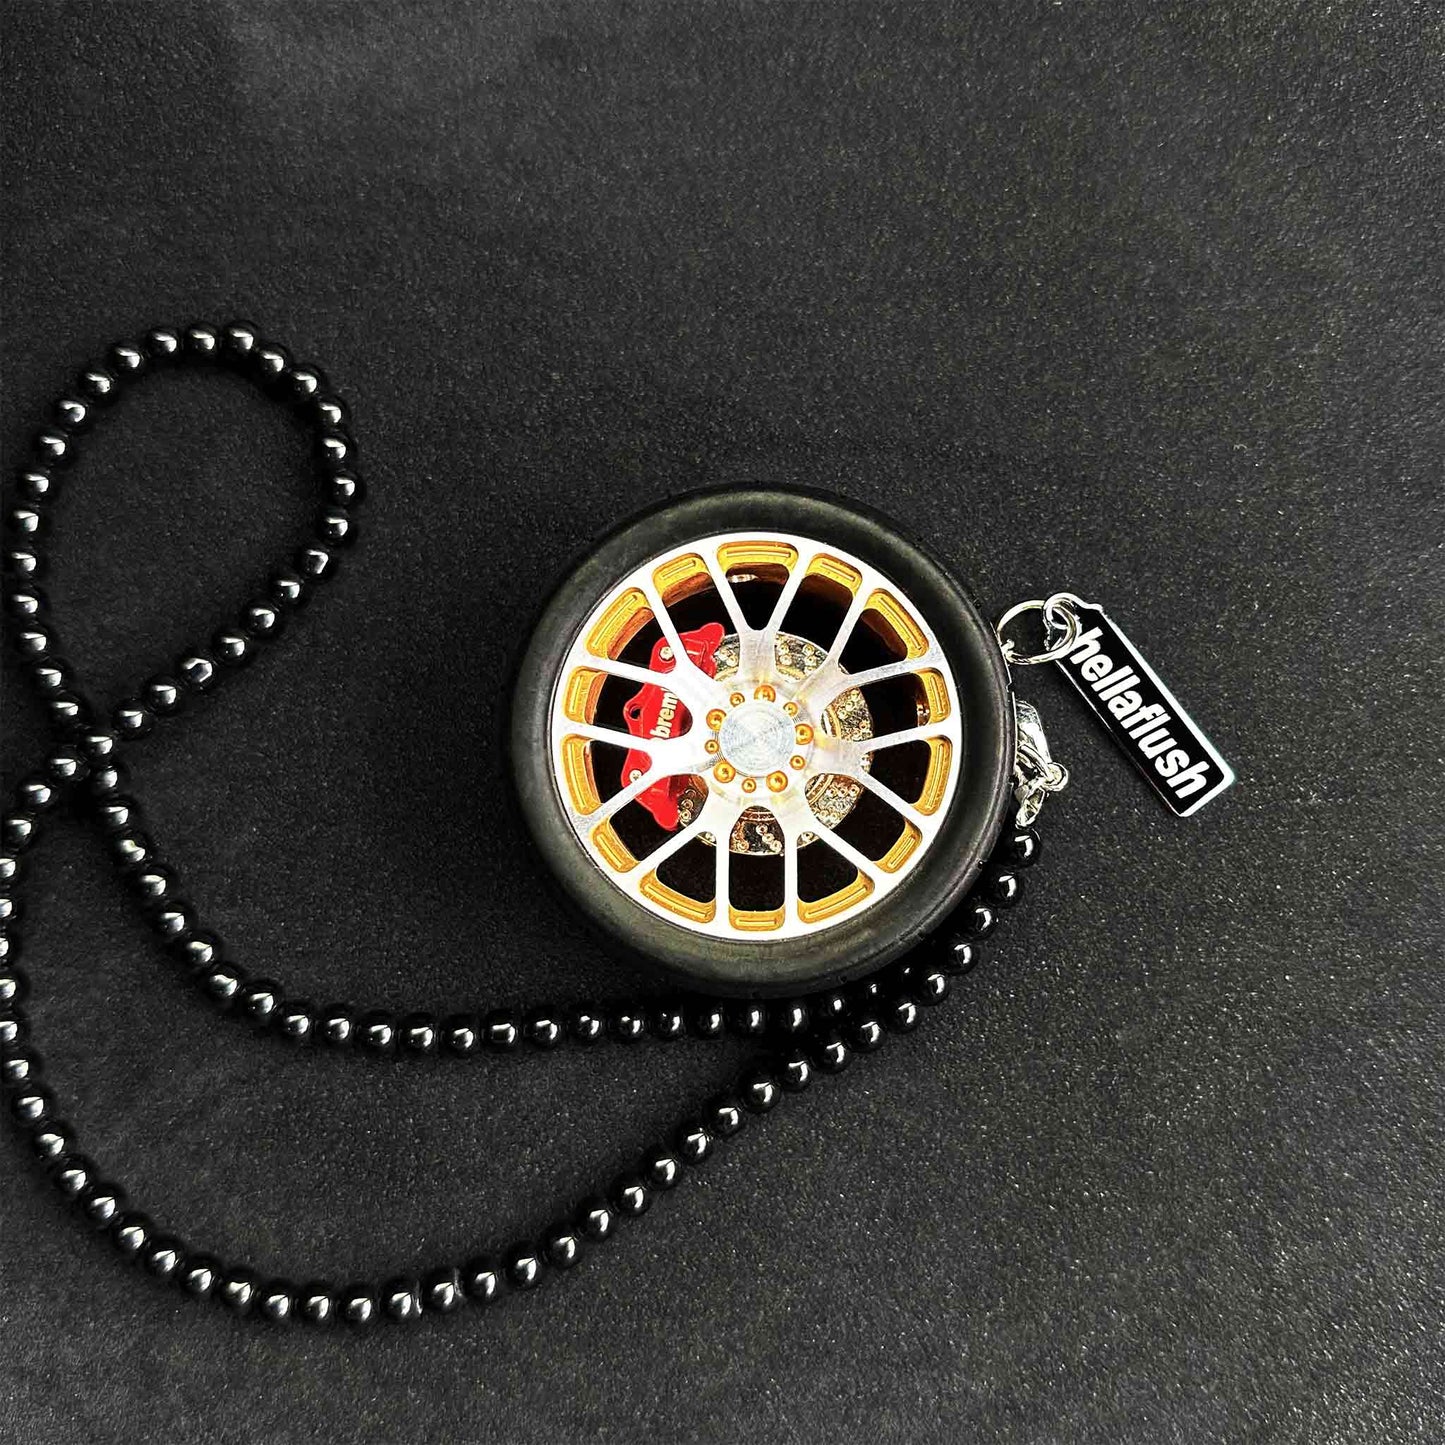 A yellow BBS wheel air-freshener placed on a black background